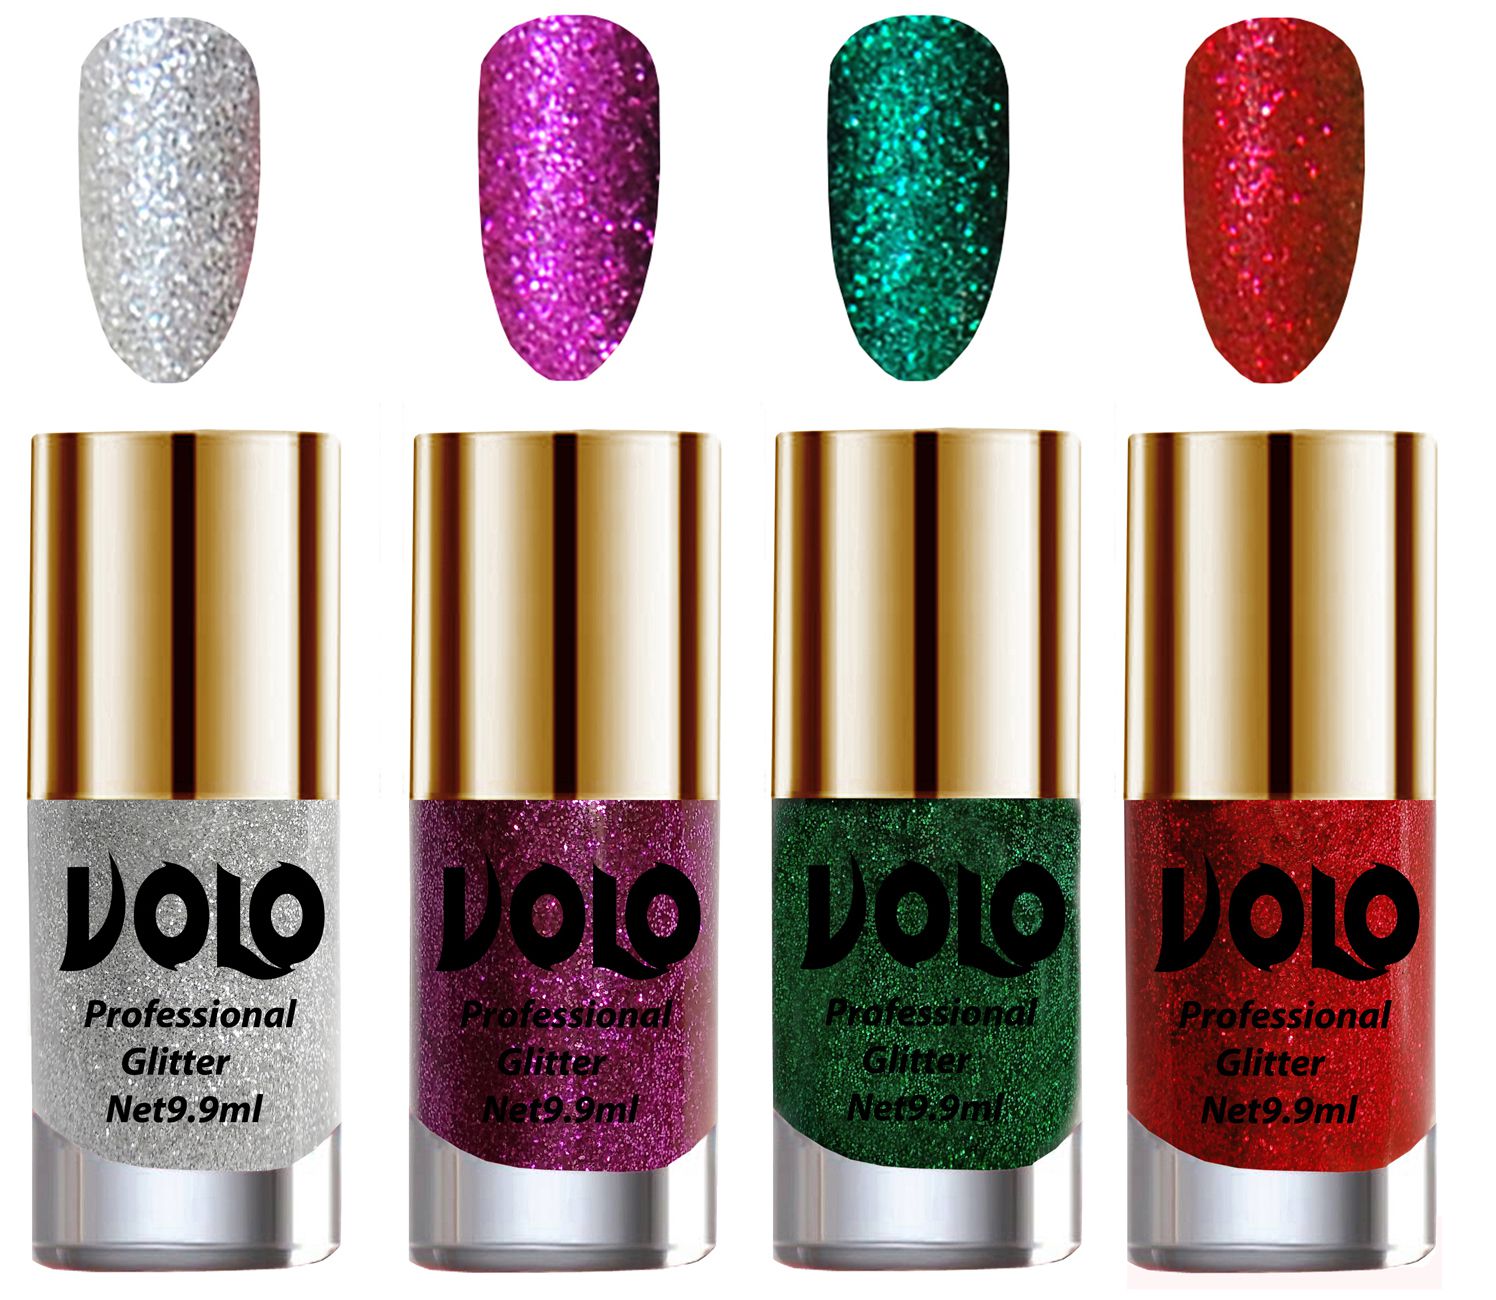     			VOLO Professionally Used Glitter Shine Nail Polish Silver,Purple,Green Red Pack of 4 39 mL